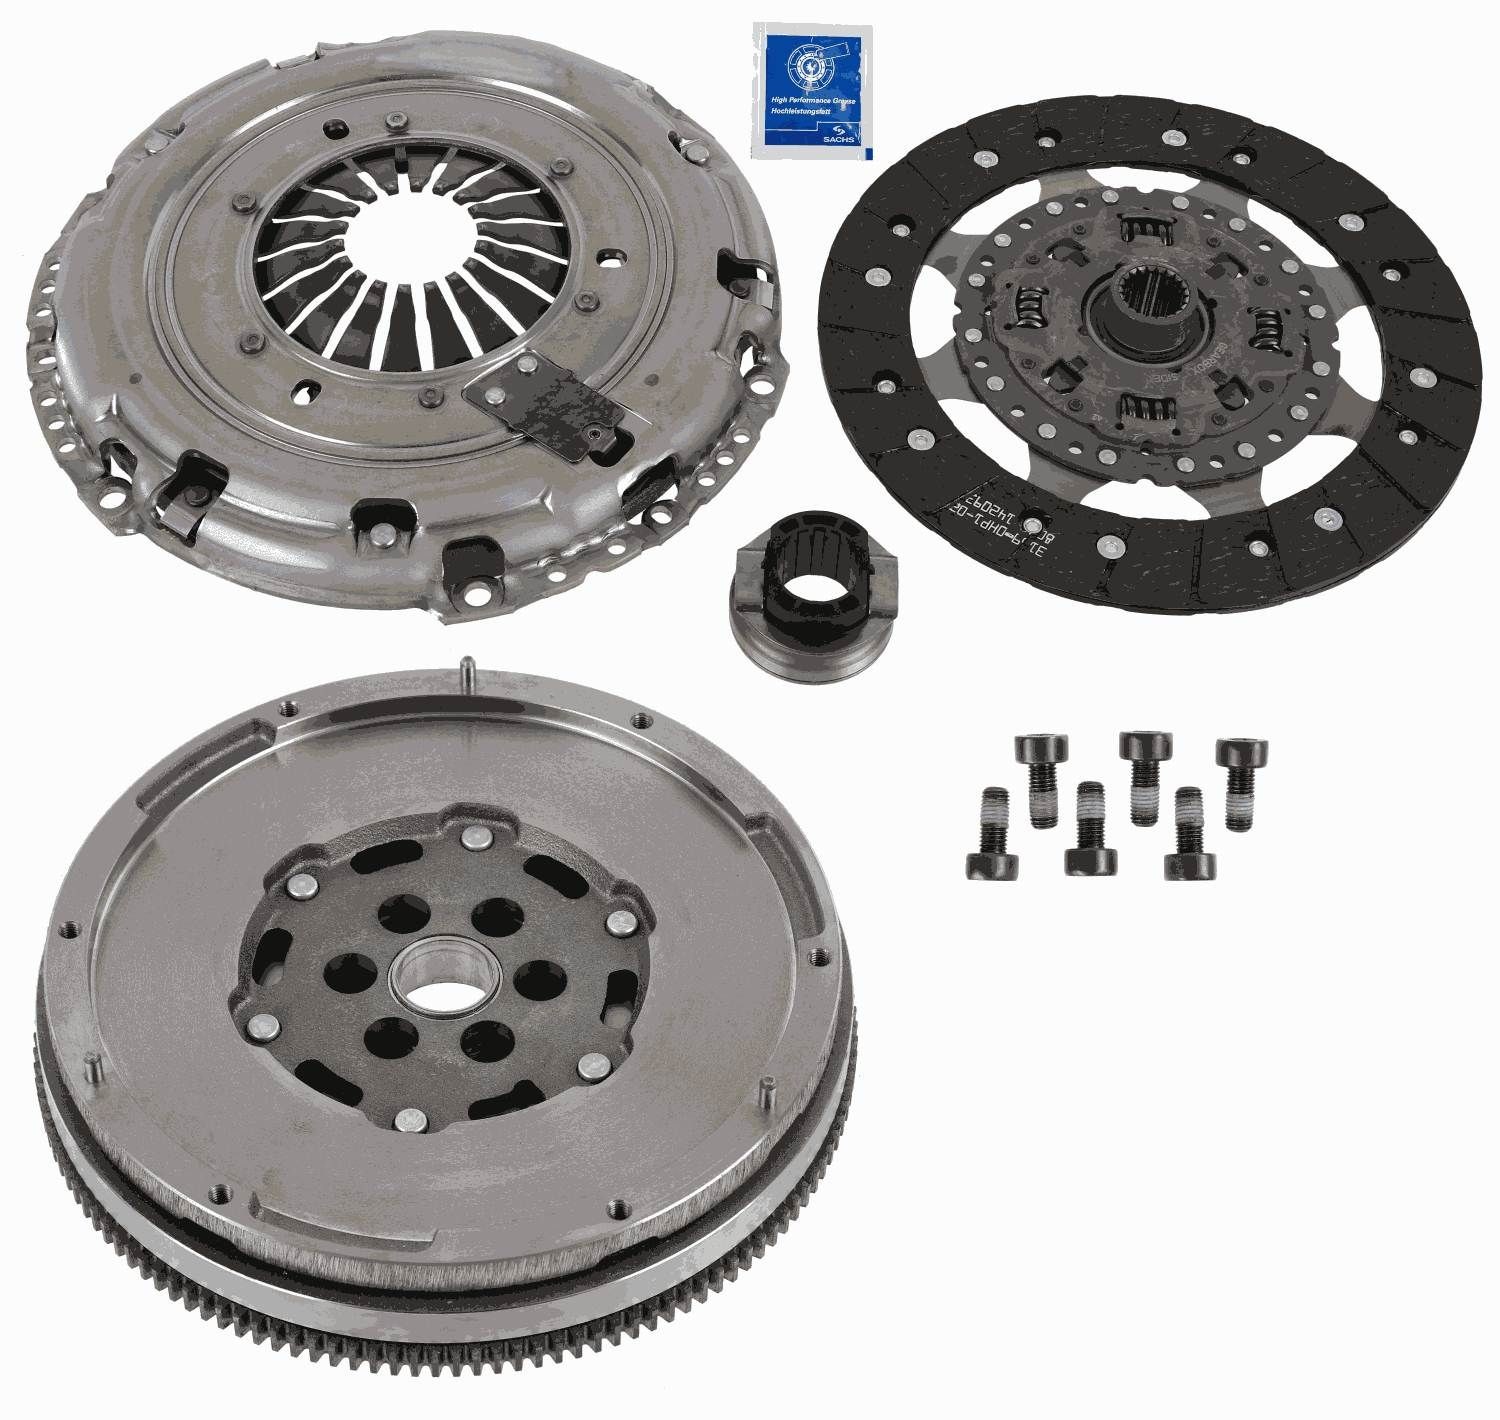 Original SACHS Clutch replacement kit 2290 601 128 for OPEL COMBO